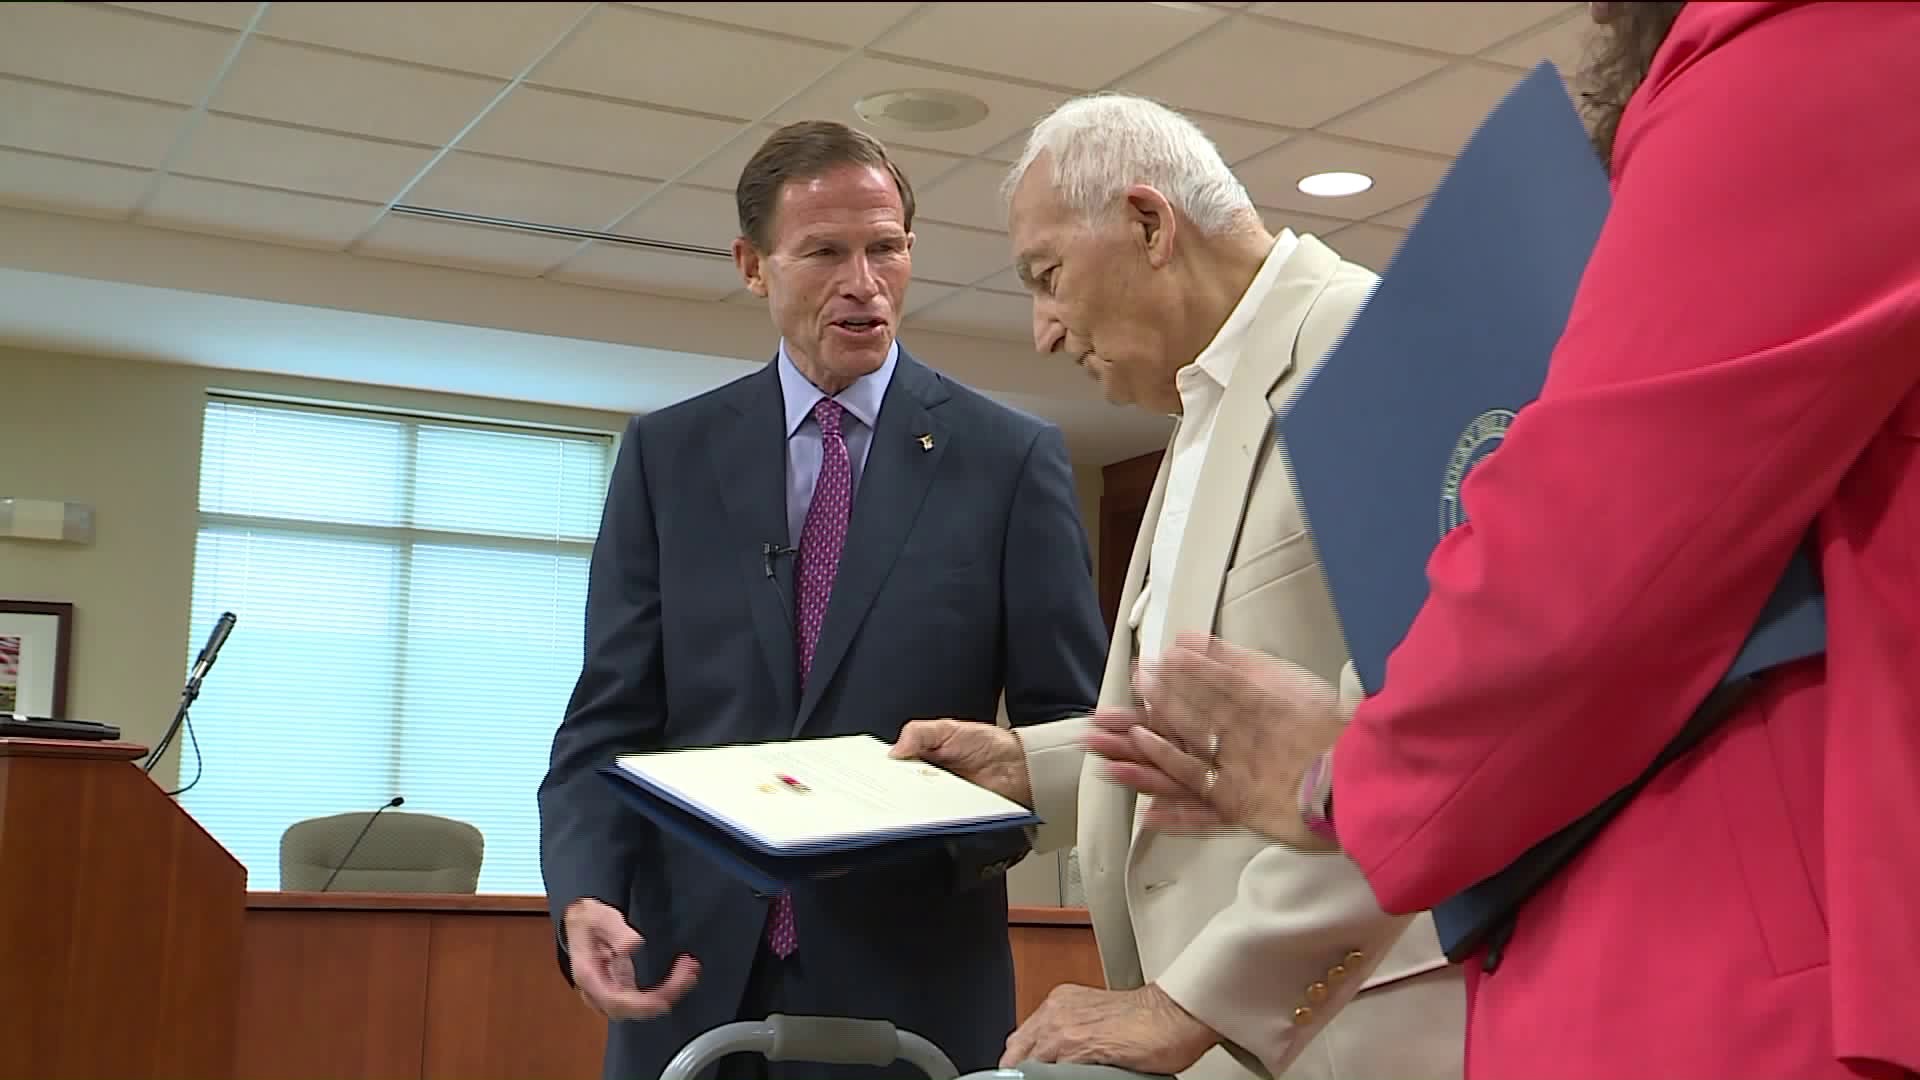 FOX61 helps Veteran get his medals back after they were stolen 50 years ago